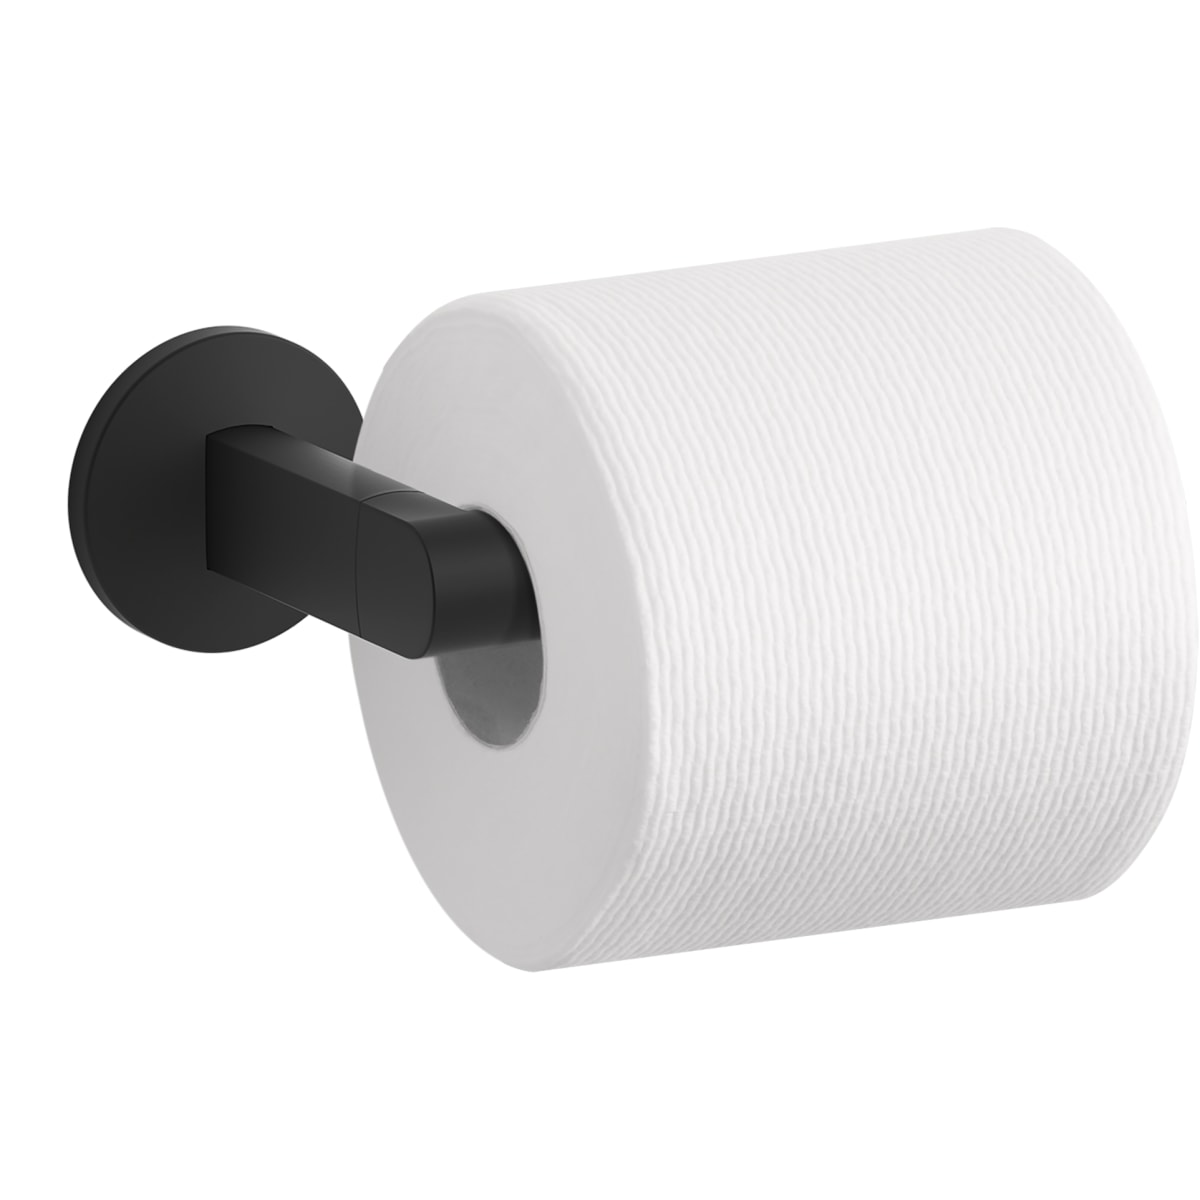 Kohler K-78382-BL Components Wall Mounted Pivoting Toilet